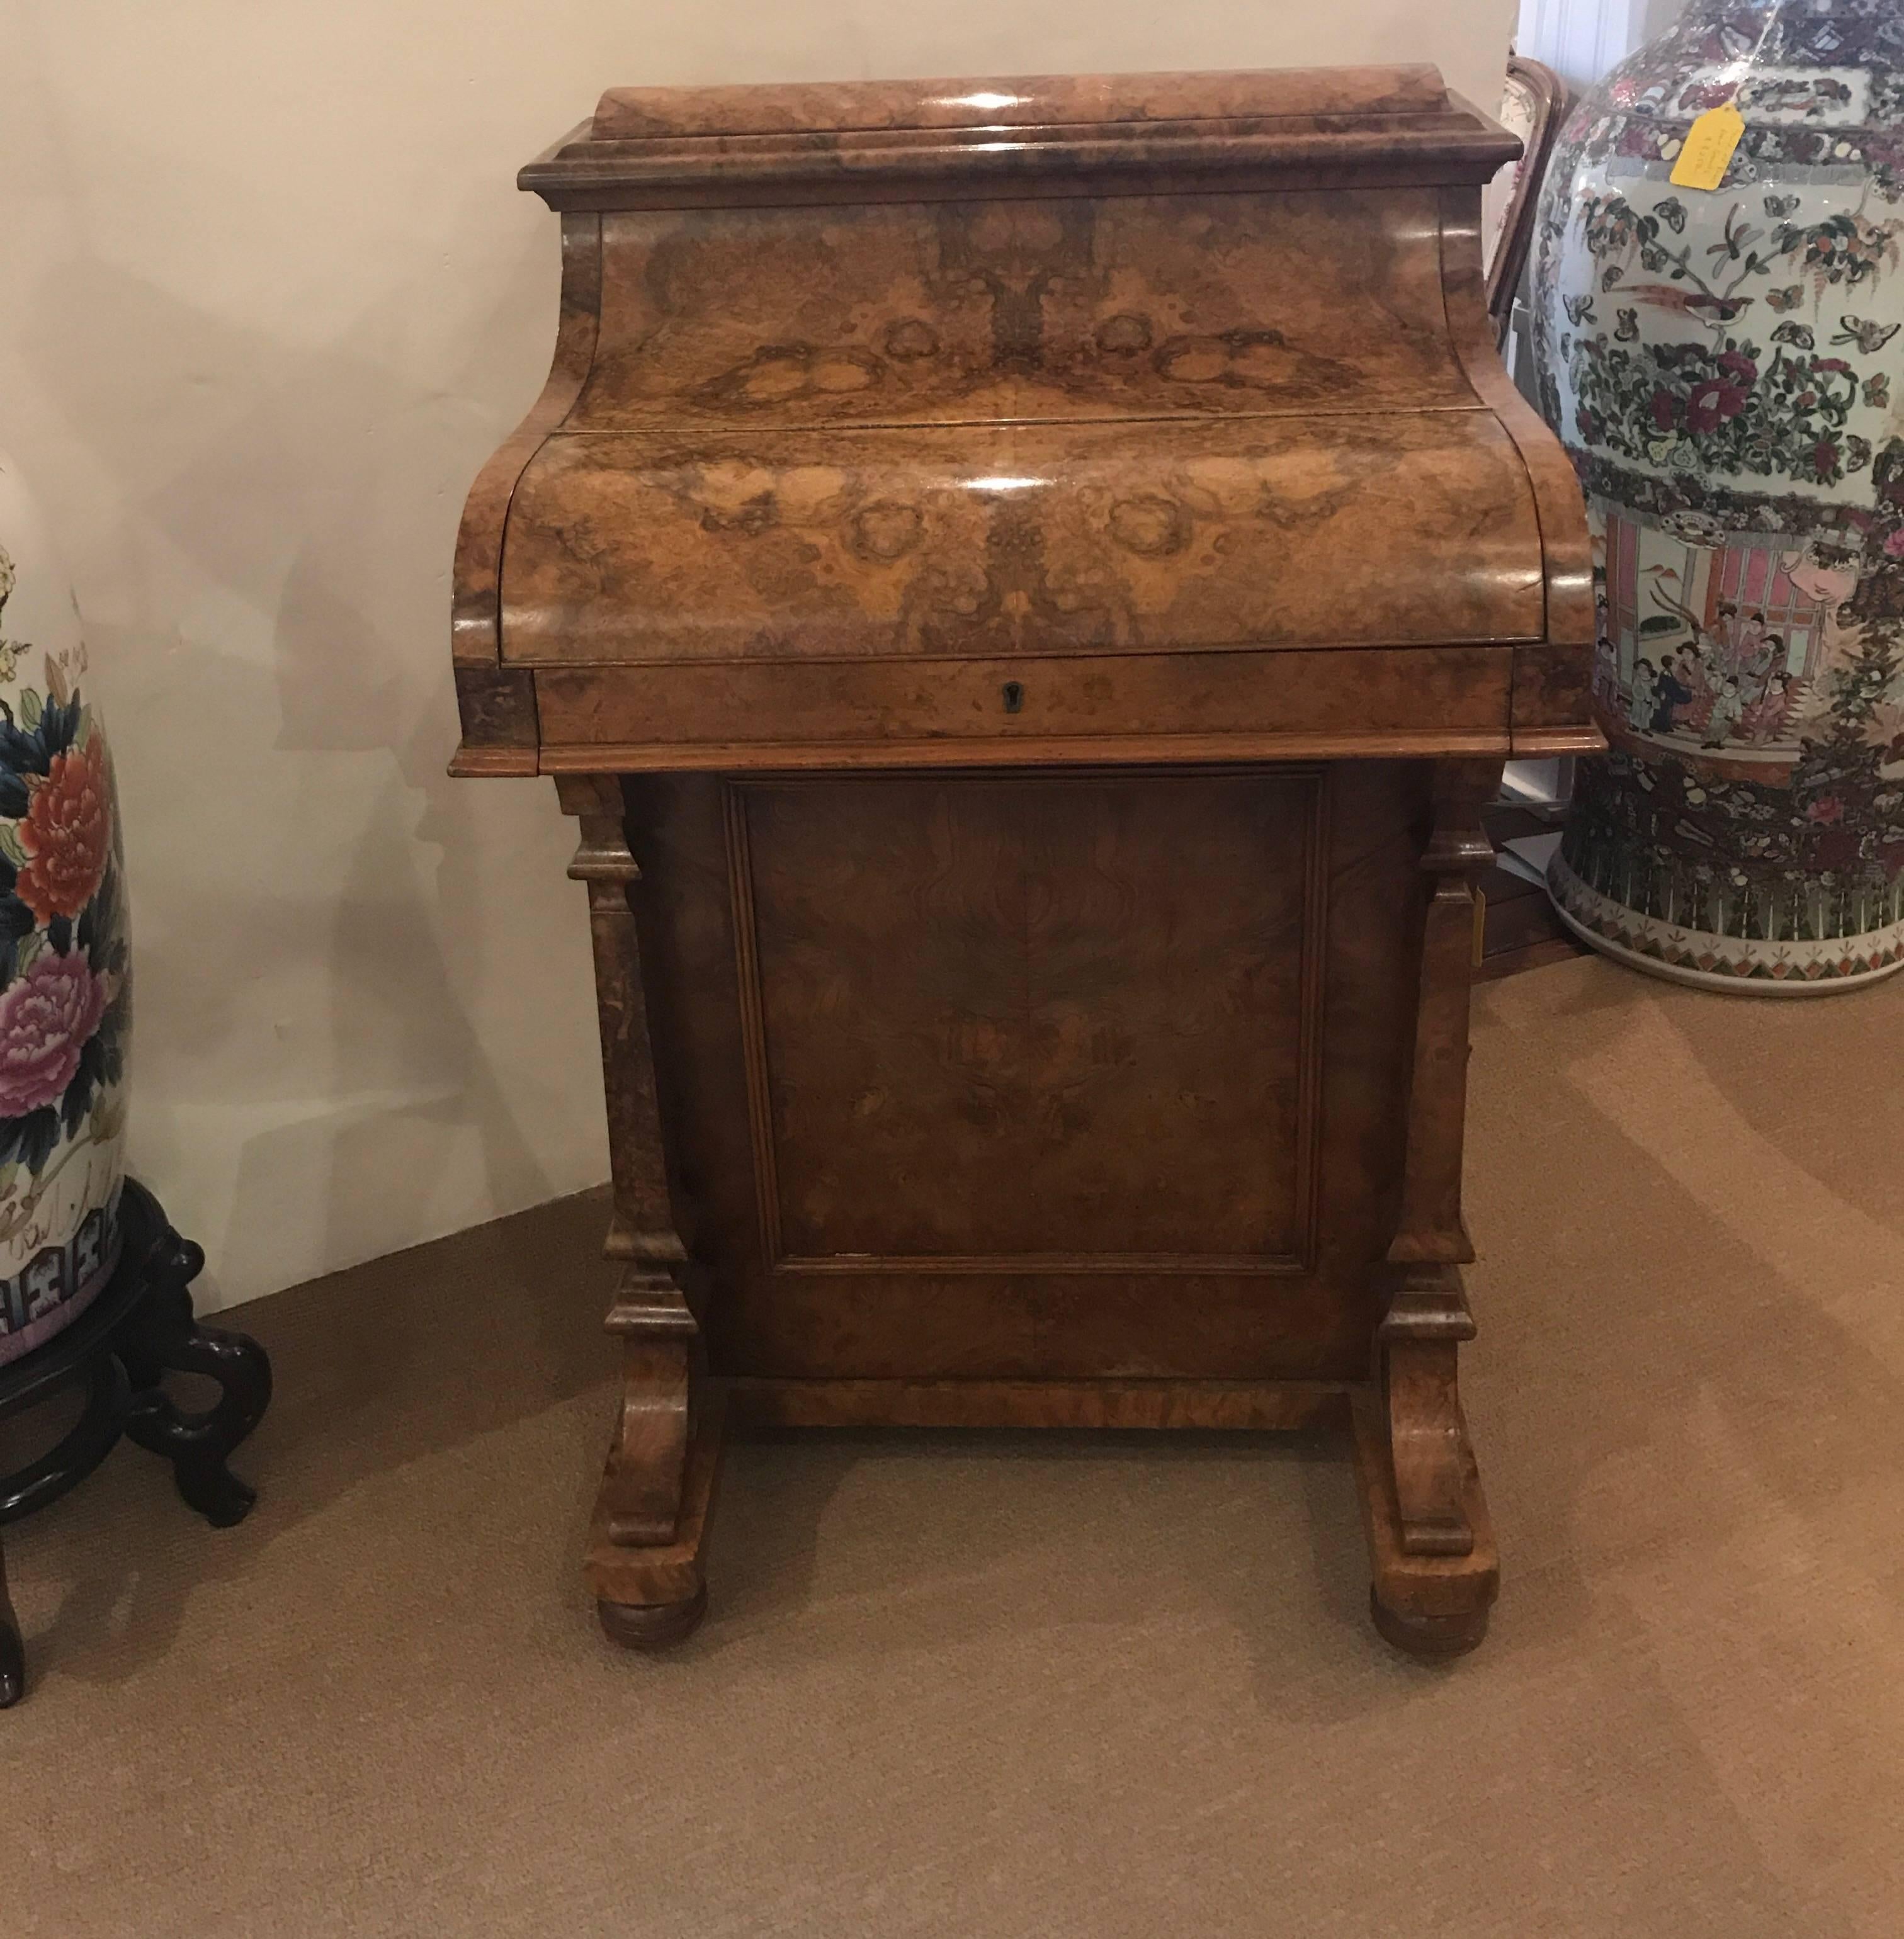 Exceptional quality English Davenport desk in burl walnut. The smokey burl grain with recent French polish. The desk has many drawers and compartments and a flip front to revel and original dark green leather writing surface. The top with a spring